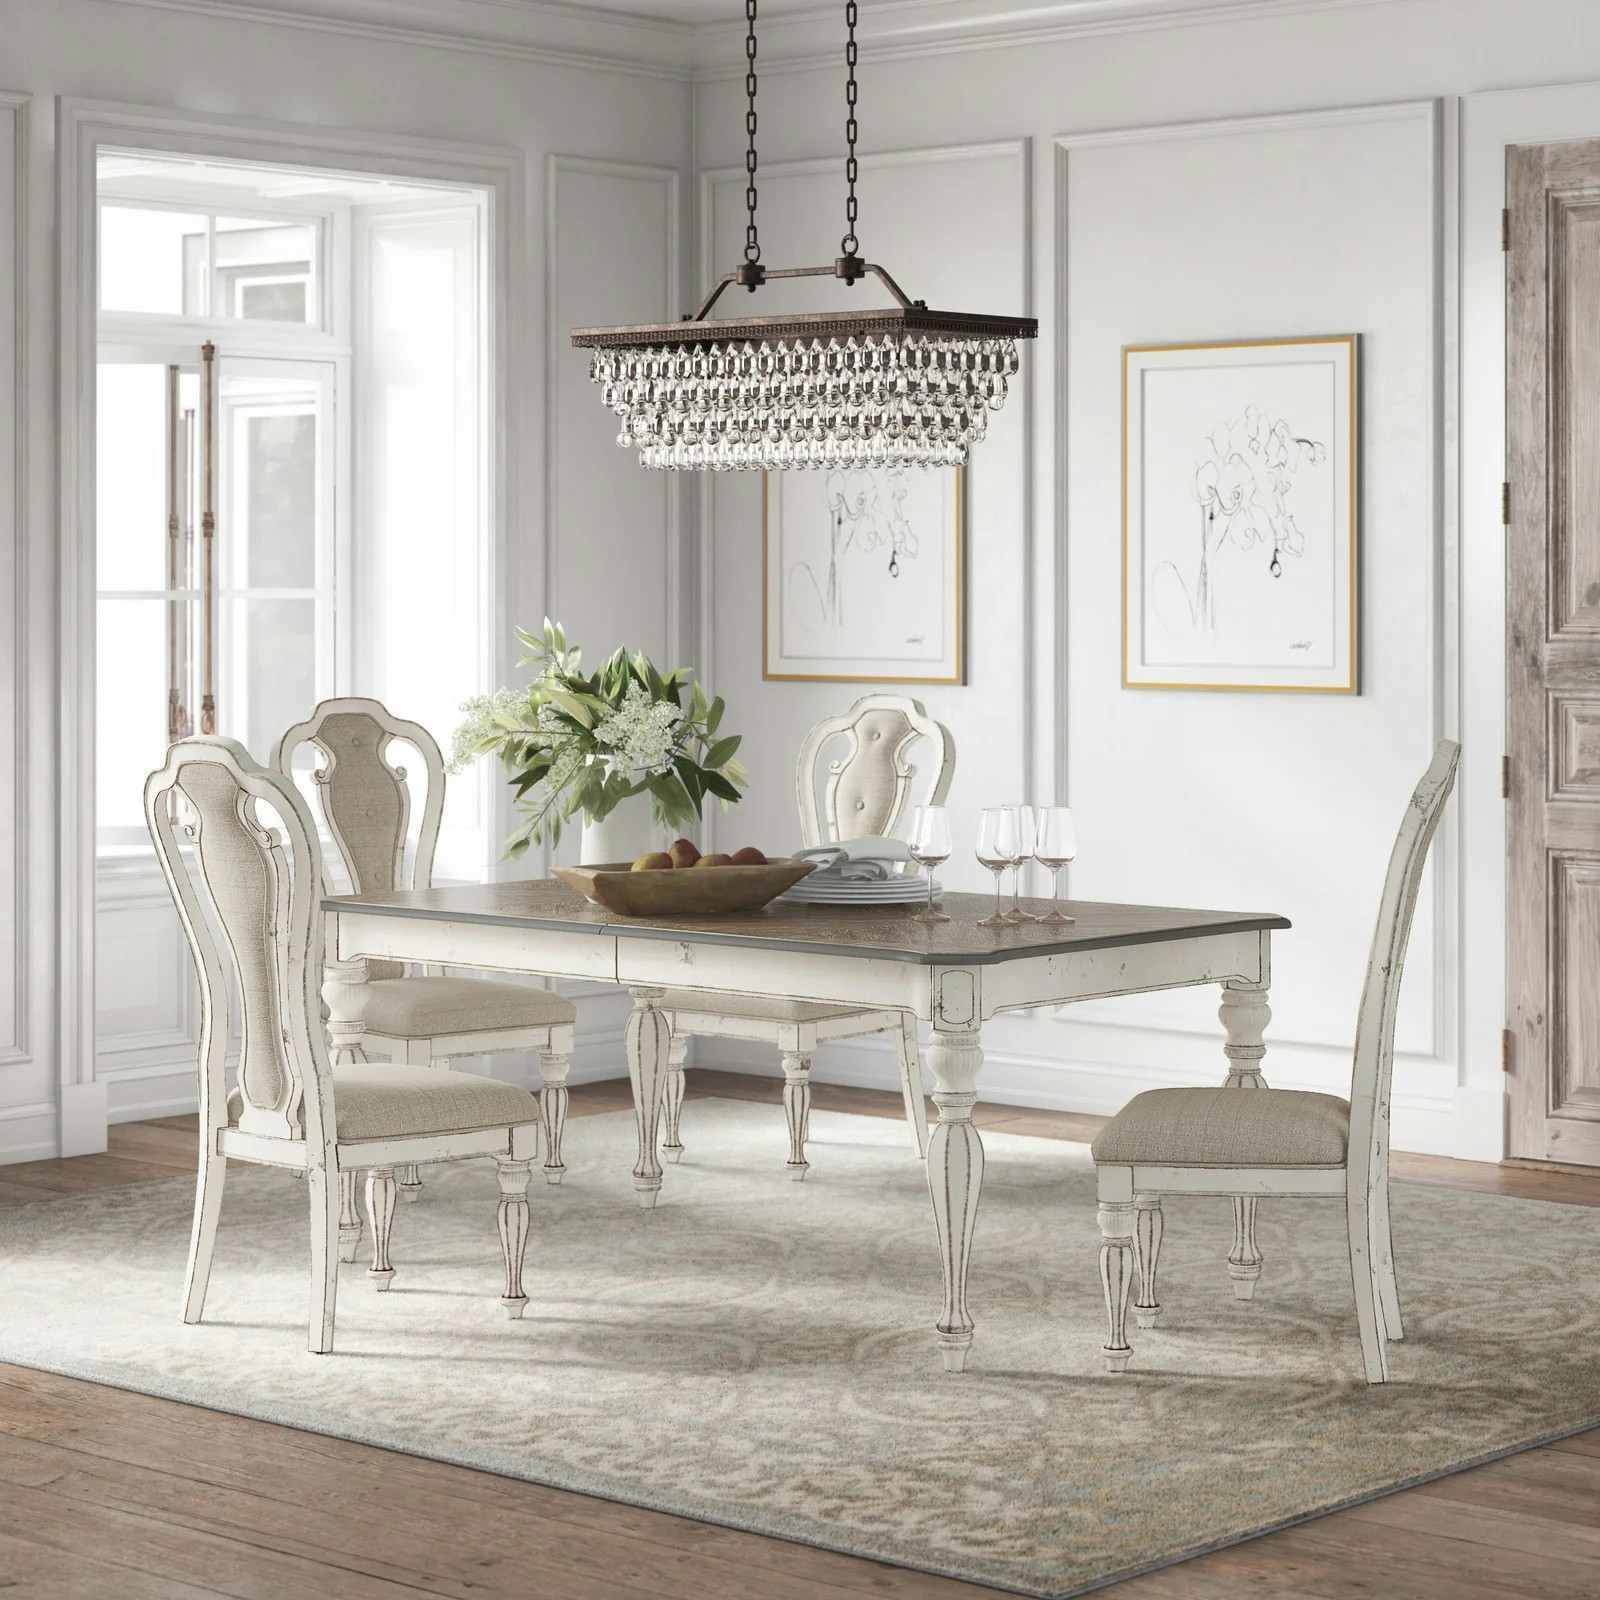 way day kelly clarkson home - dining set